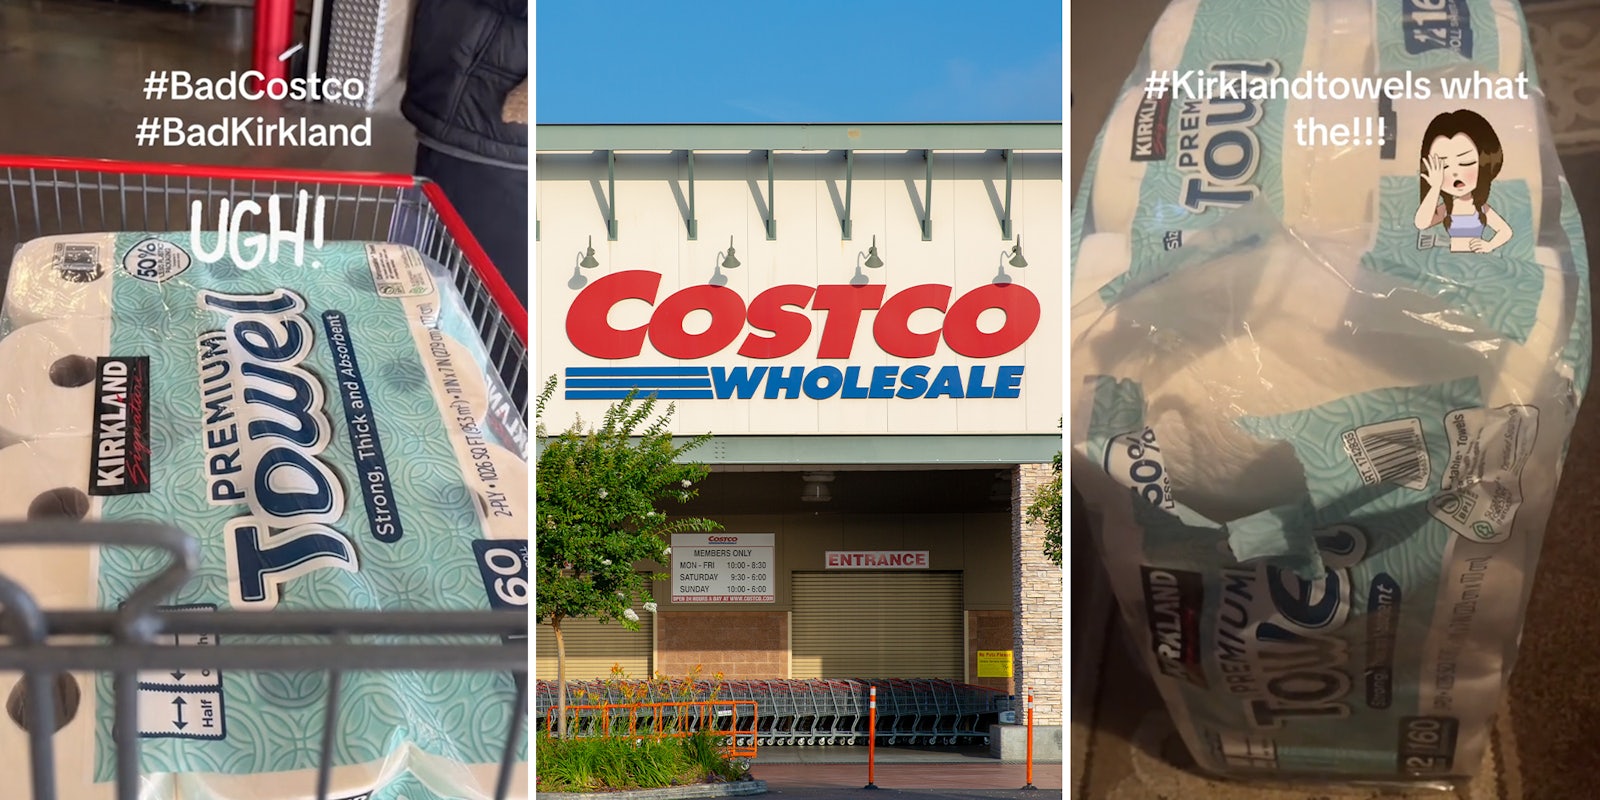 Woman complains, returns pack of Costco paper towels after store changes packaging